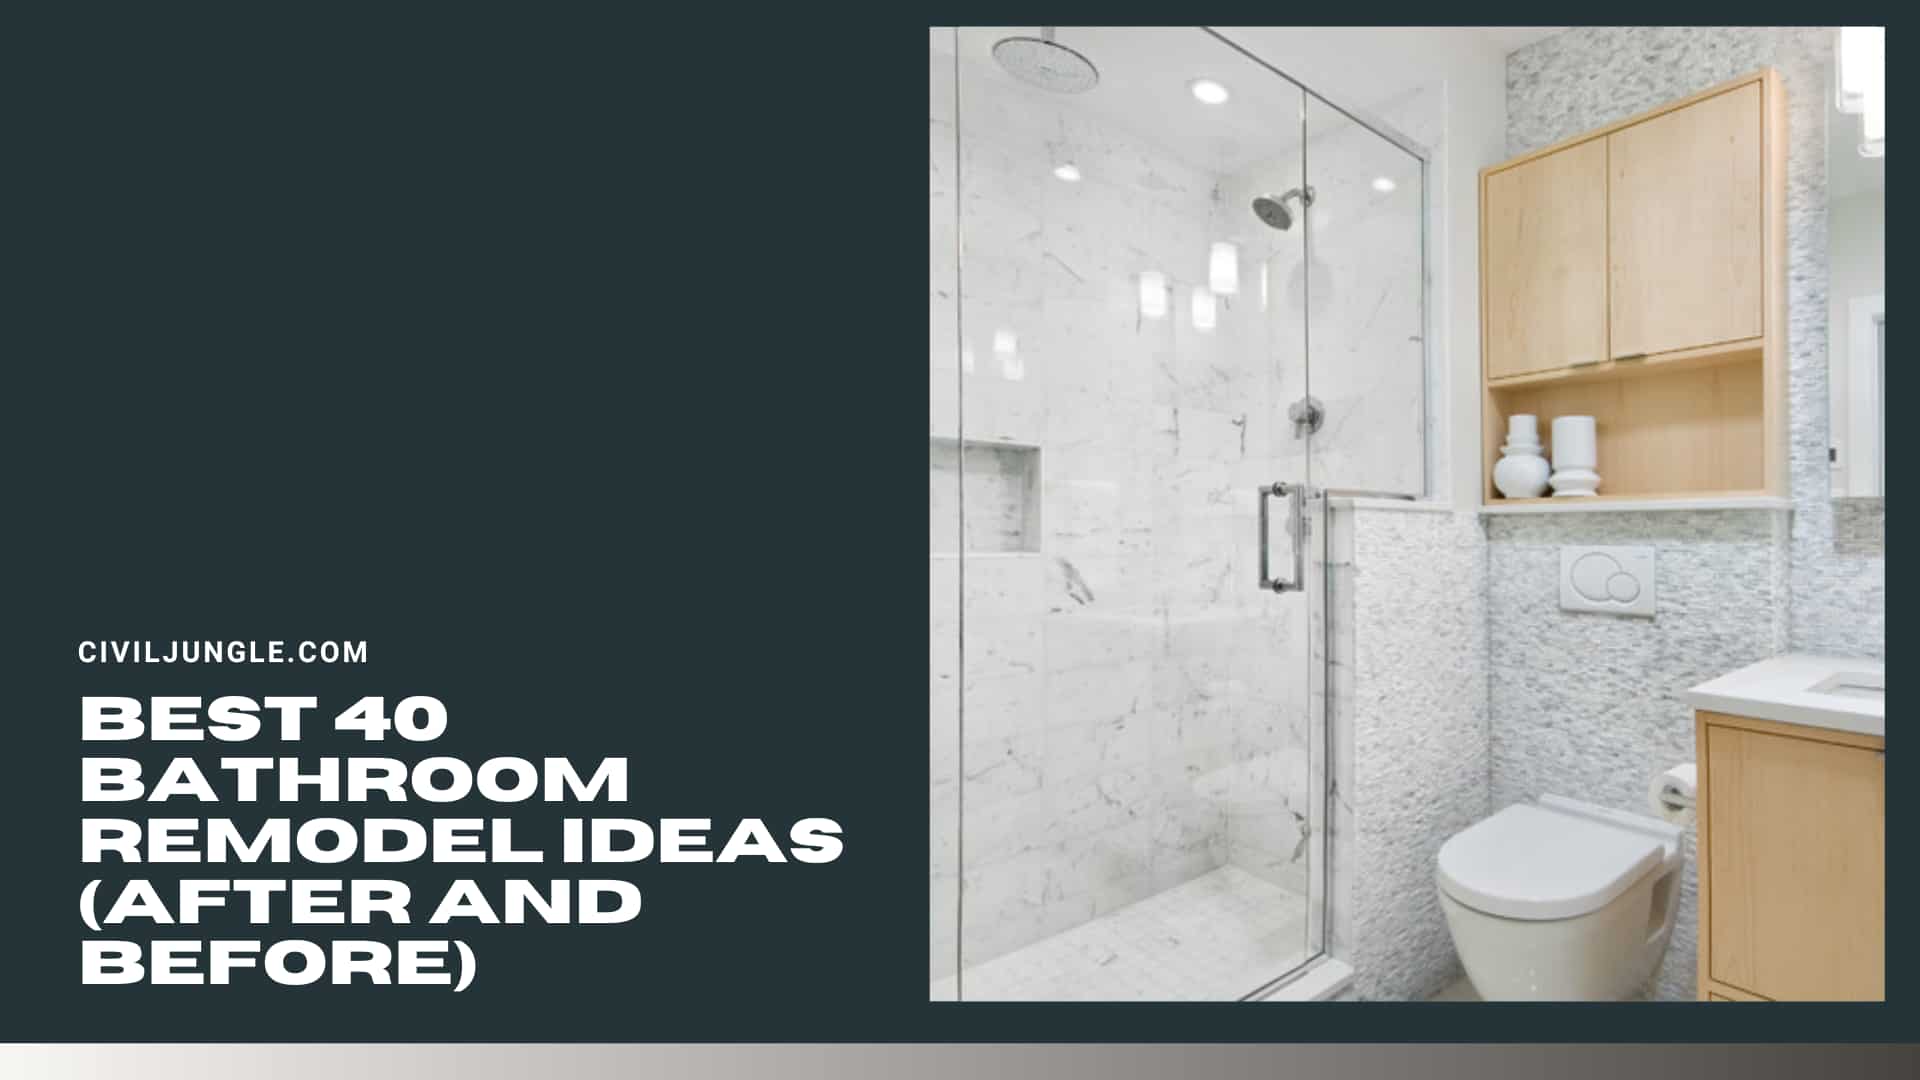 Best 40 Bathroom Remodel Ideas (After and before)